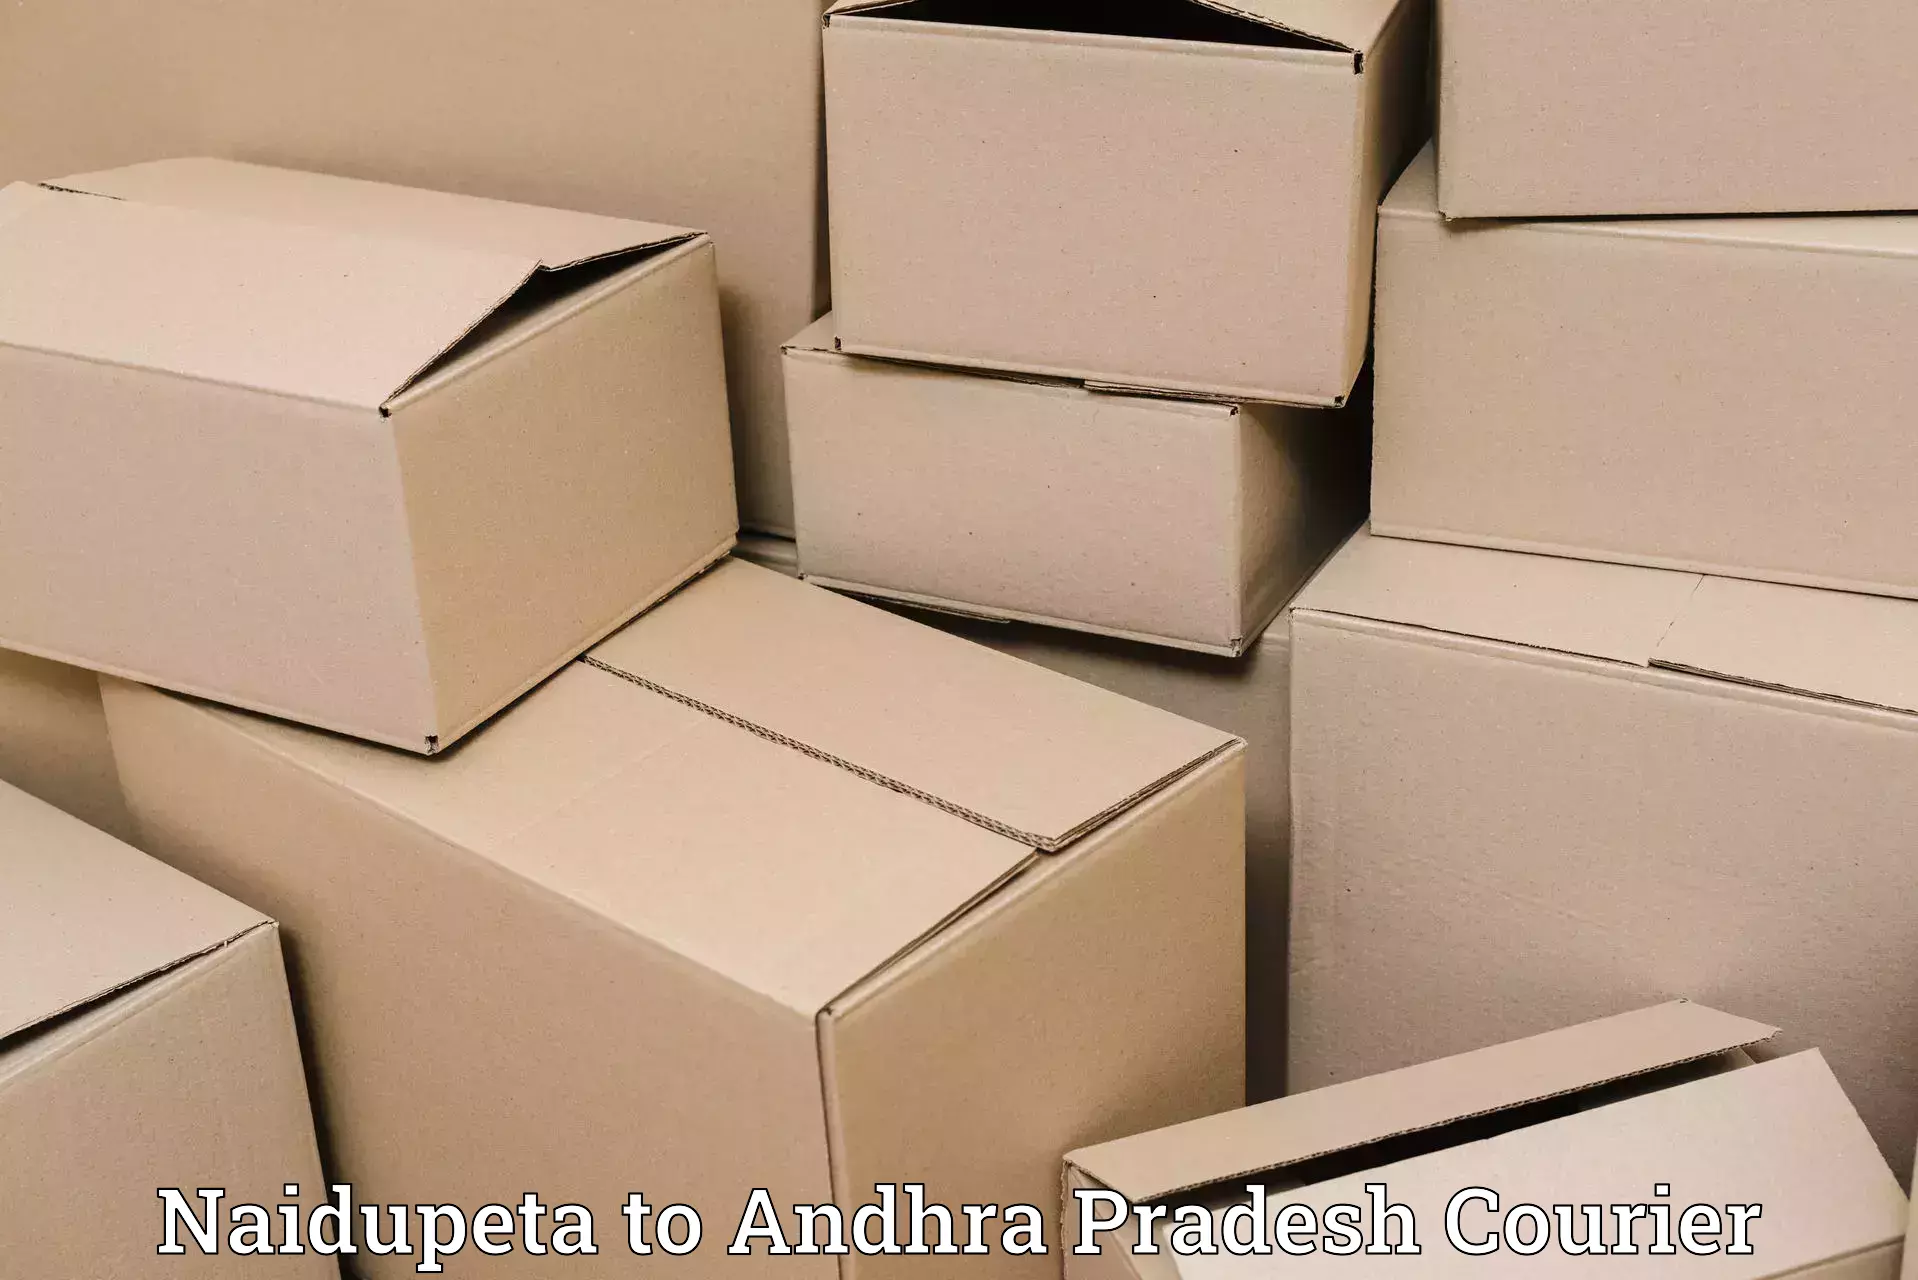 Cash on delivery service Naidupeta to Kathipudi